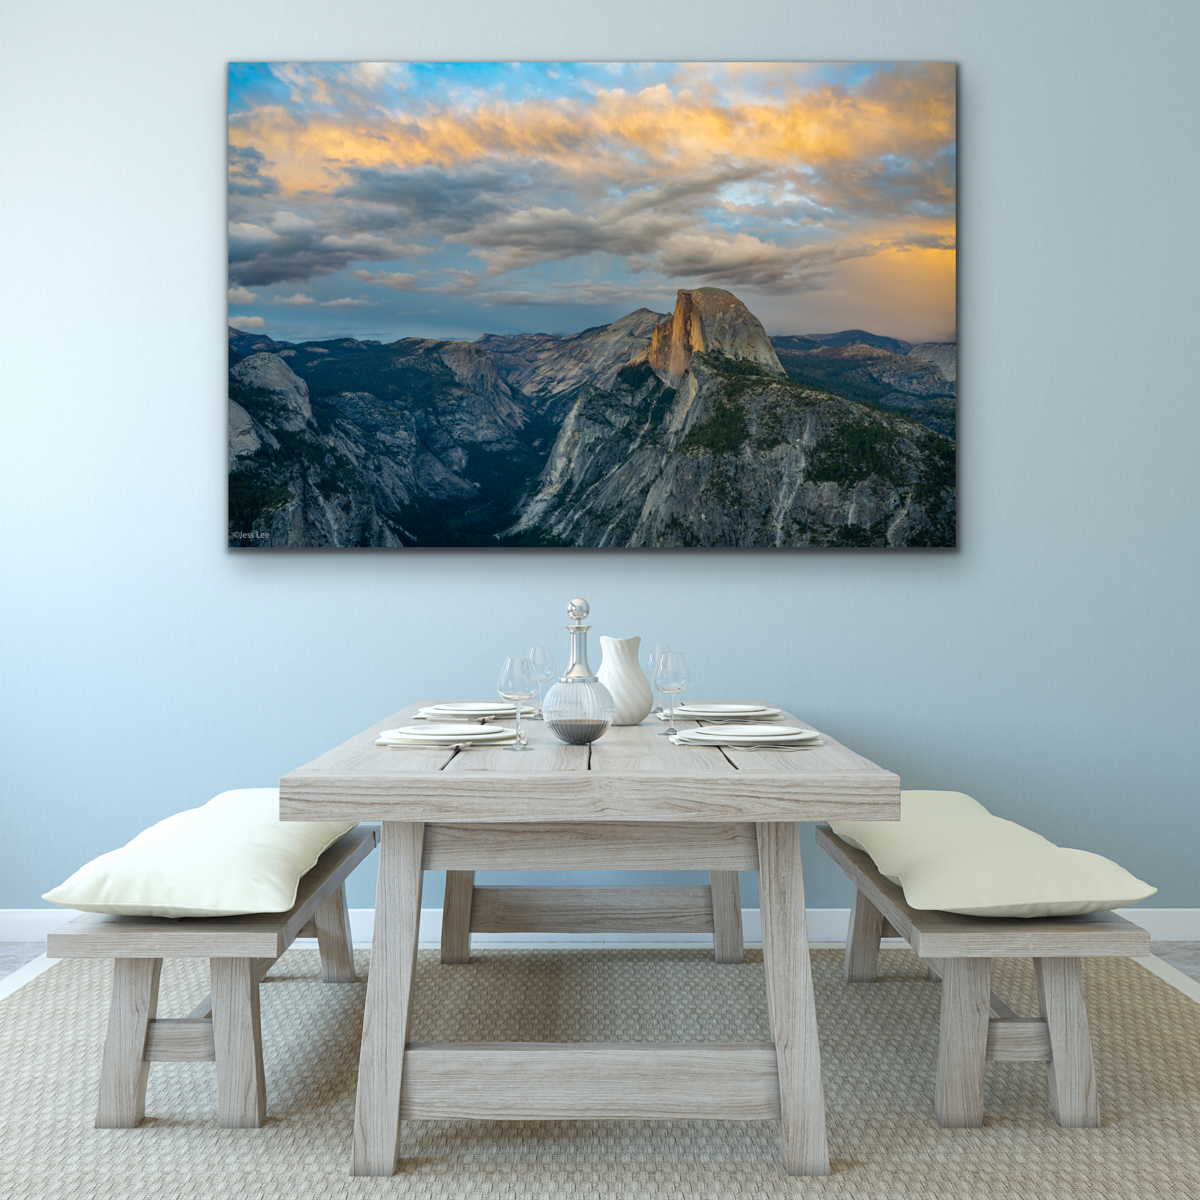 Yosemite Photography Prints. Pictures available as an Acrylic, Metal, Canvas, or Fine Art Paper limited edition wall art prints.